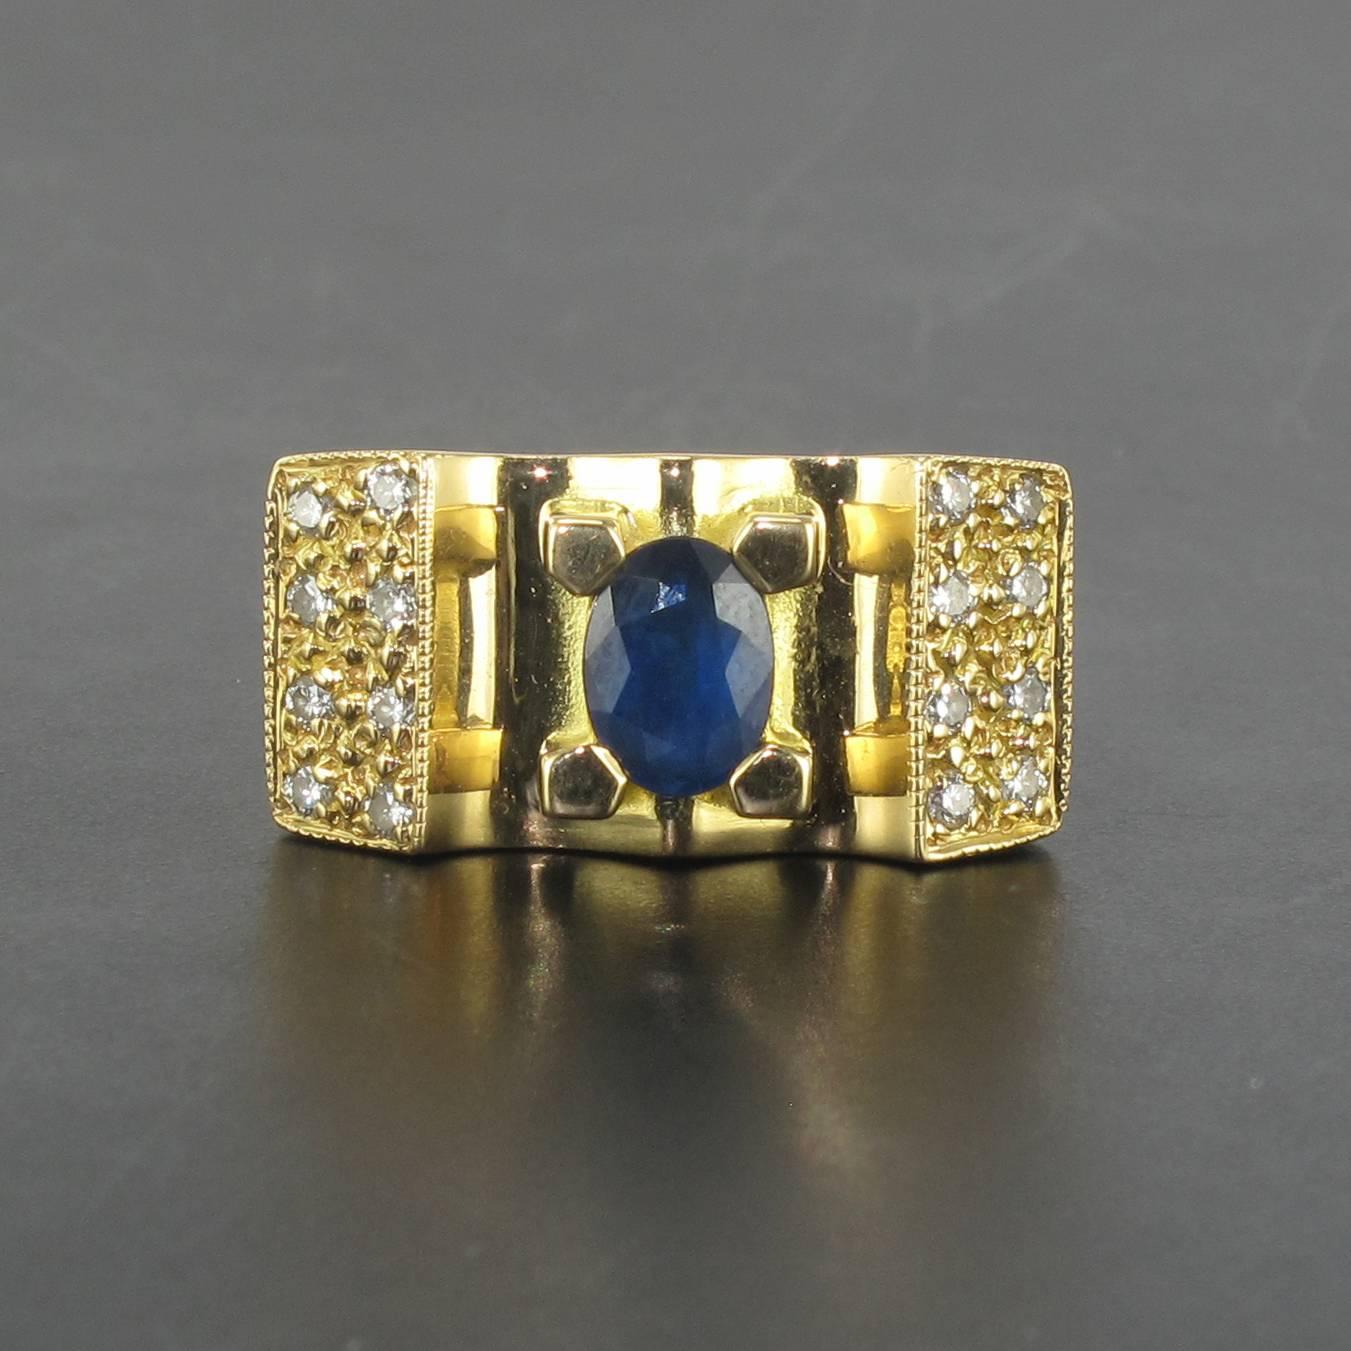 Ring in 18 carat yellow gold, eagle head hallmark. 

This sapphire ring is reminiscent of the tank rings of the 1940s. In the form of a bridge the central faceted oval blue sapphire is held by 4 large claws and set at each side with 8 brilliant